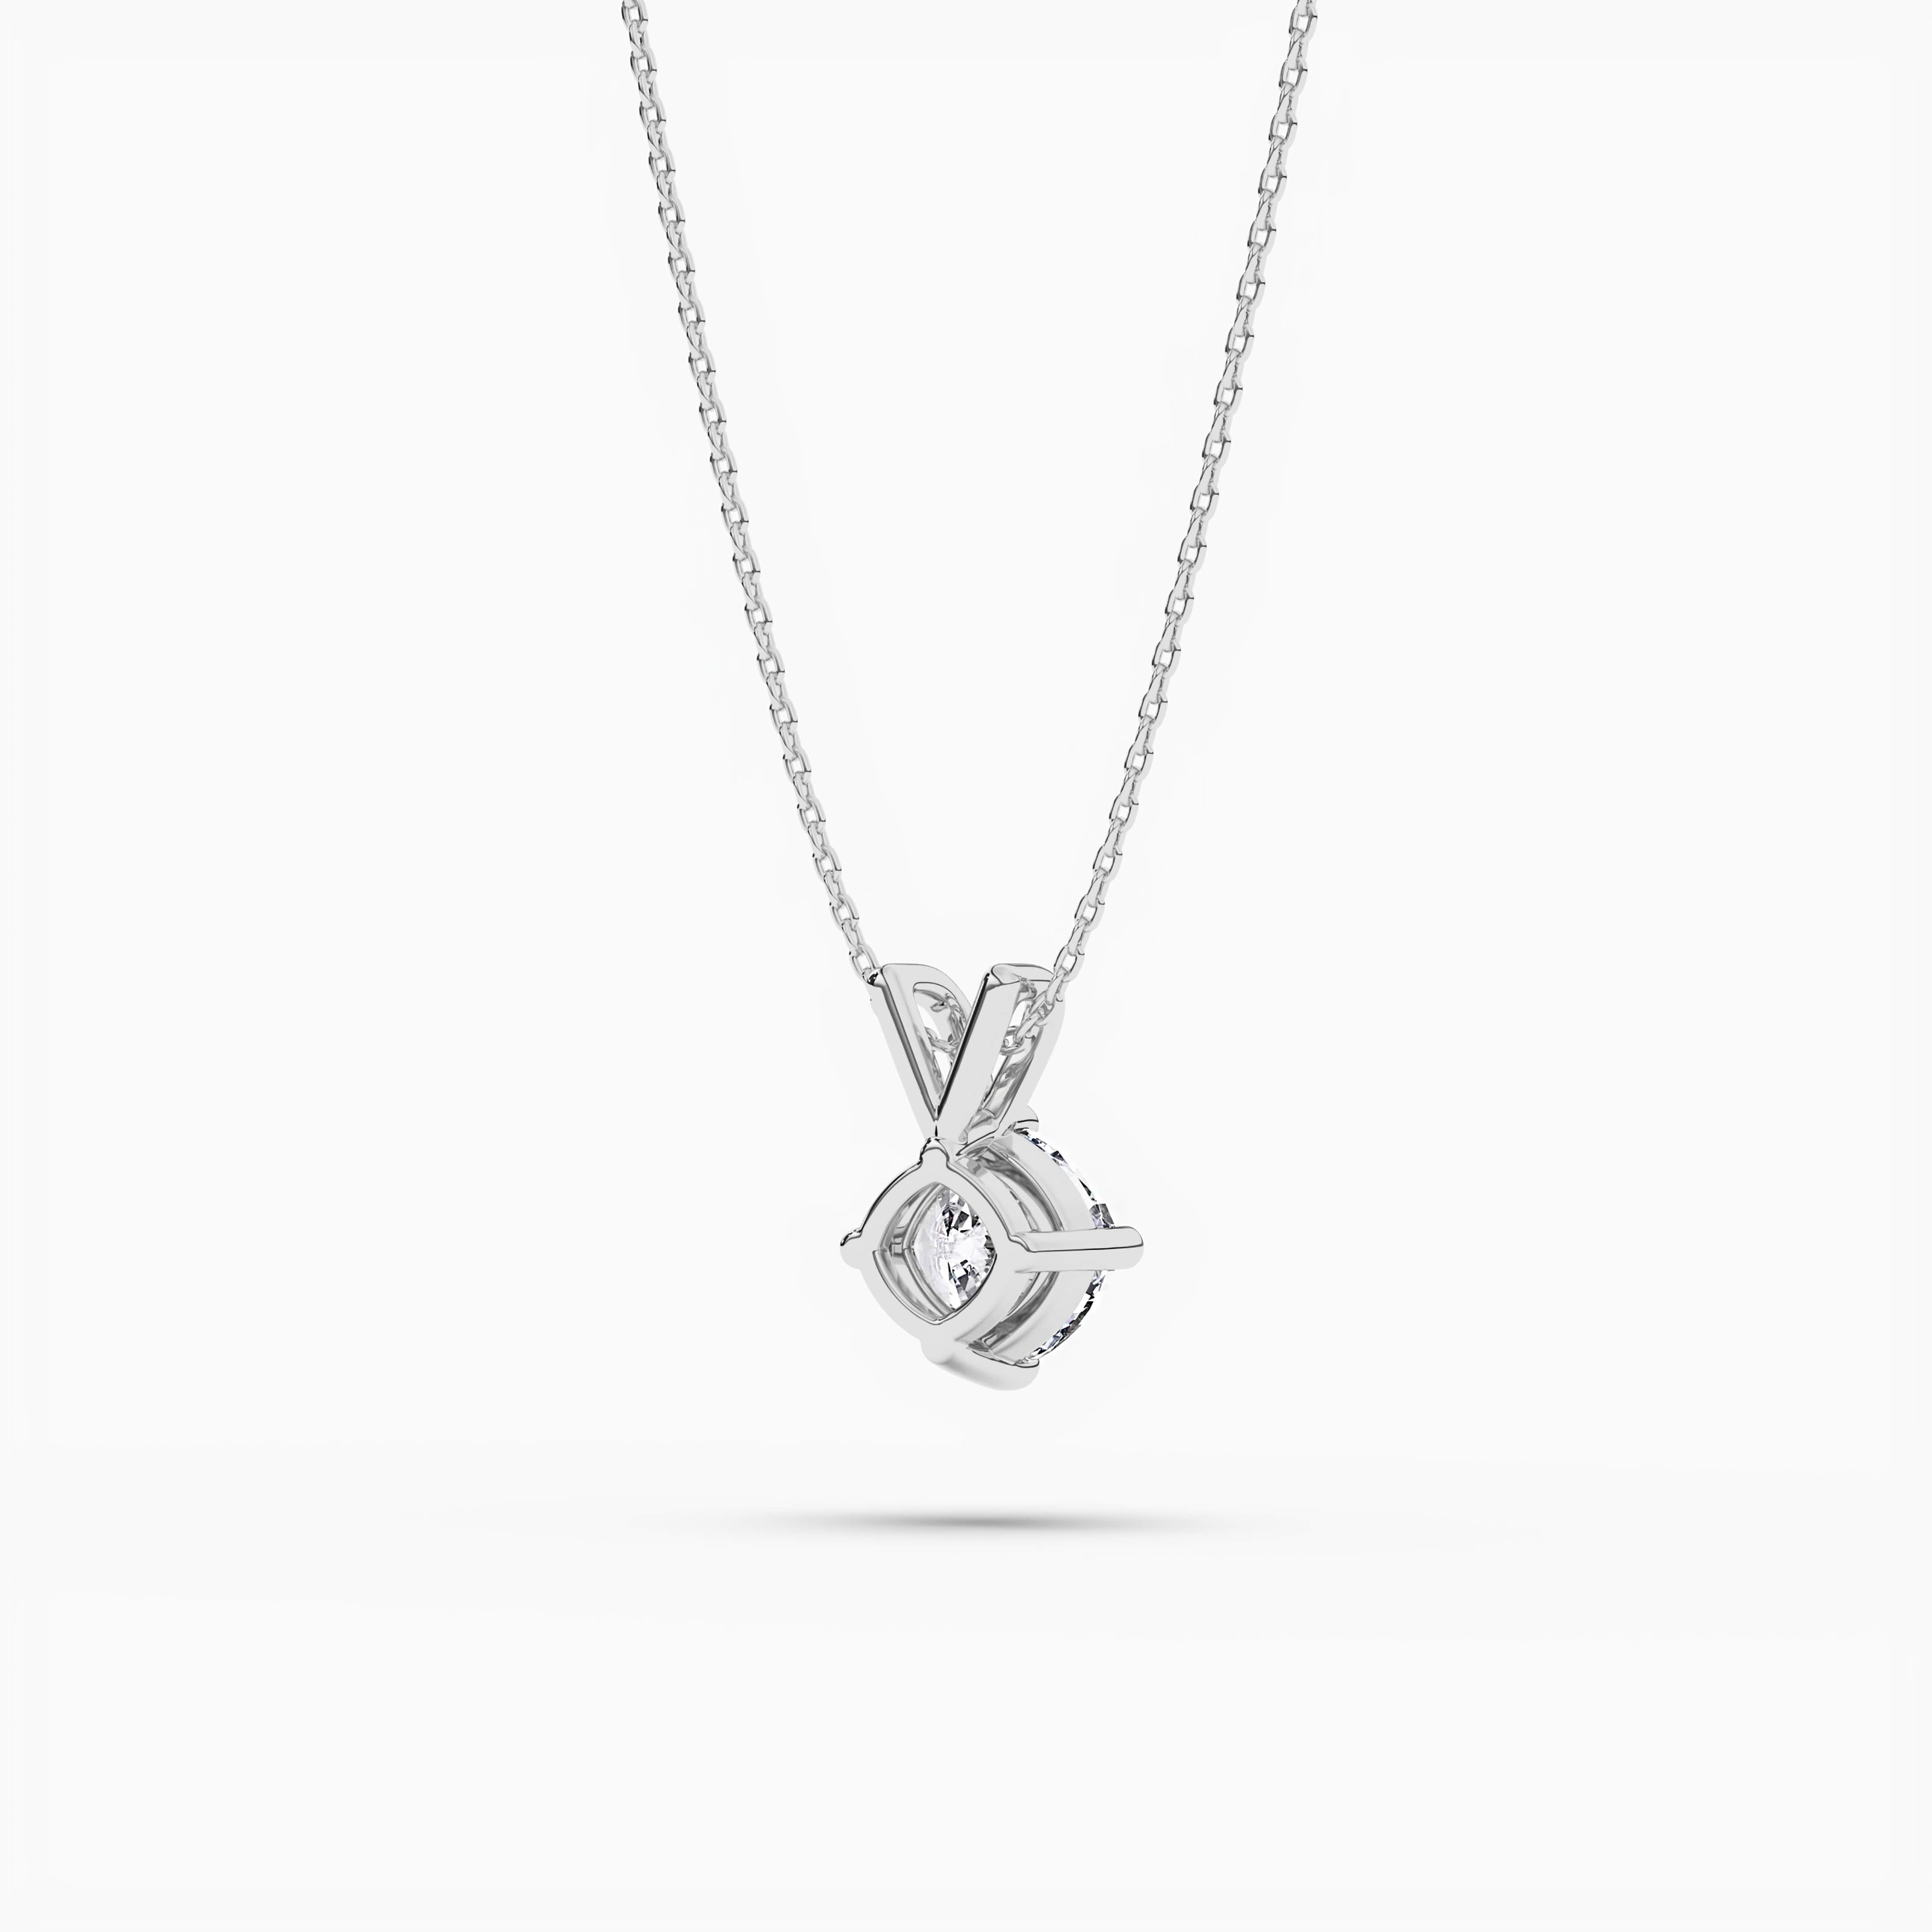 Cushion Cut and Diamond Pendant in White Gold